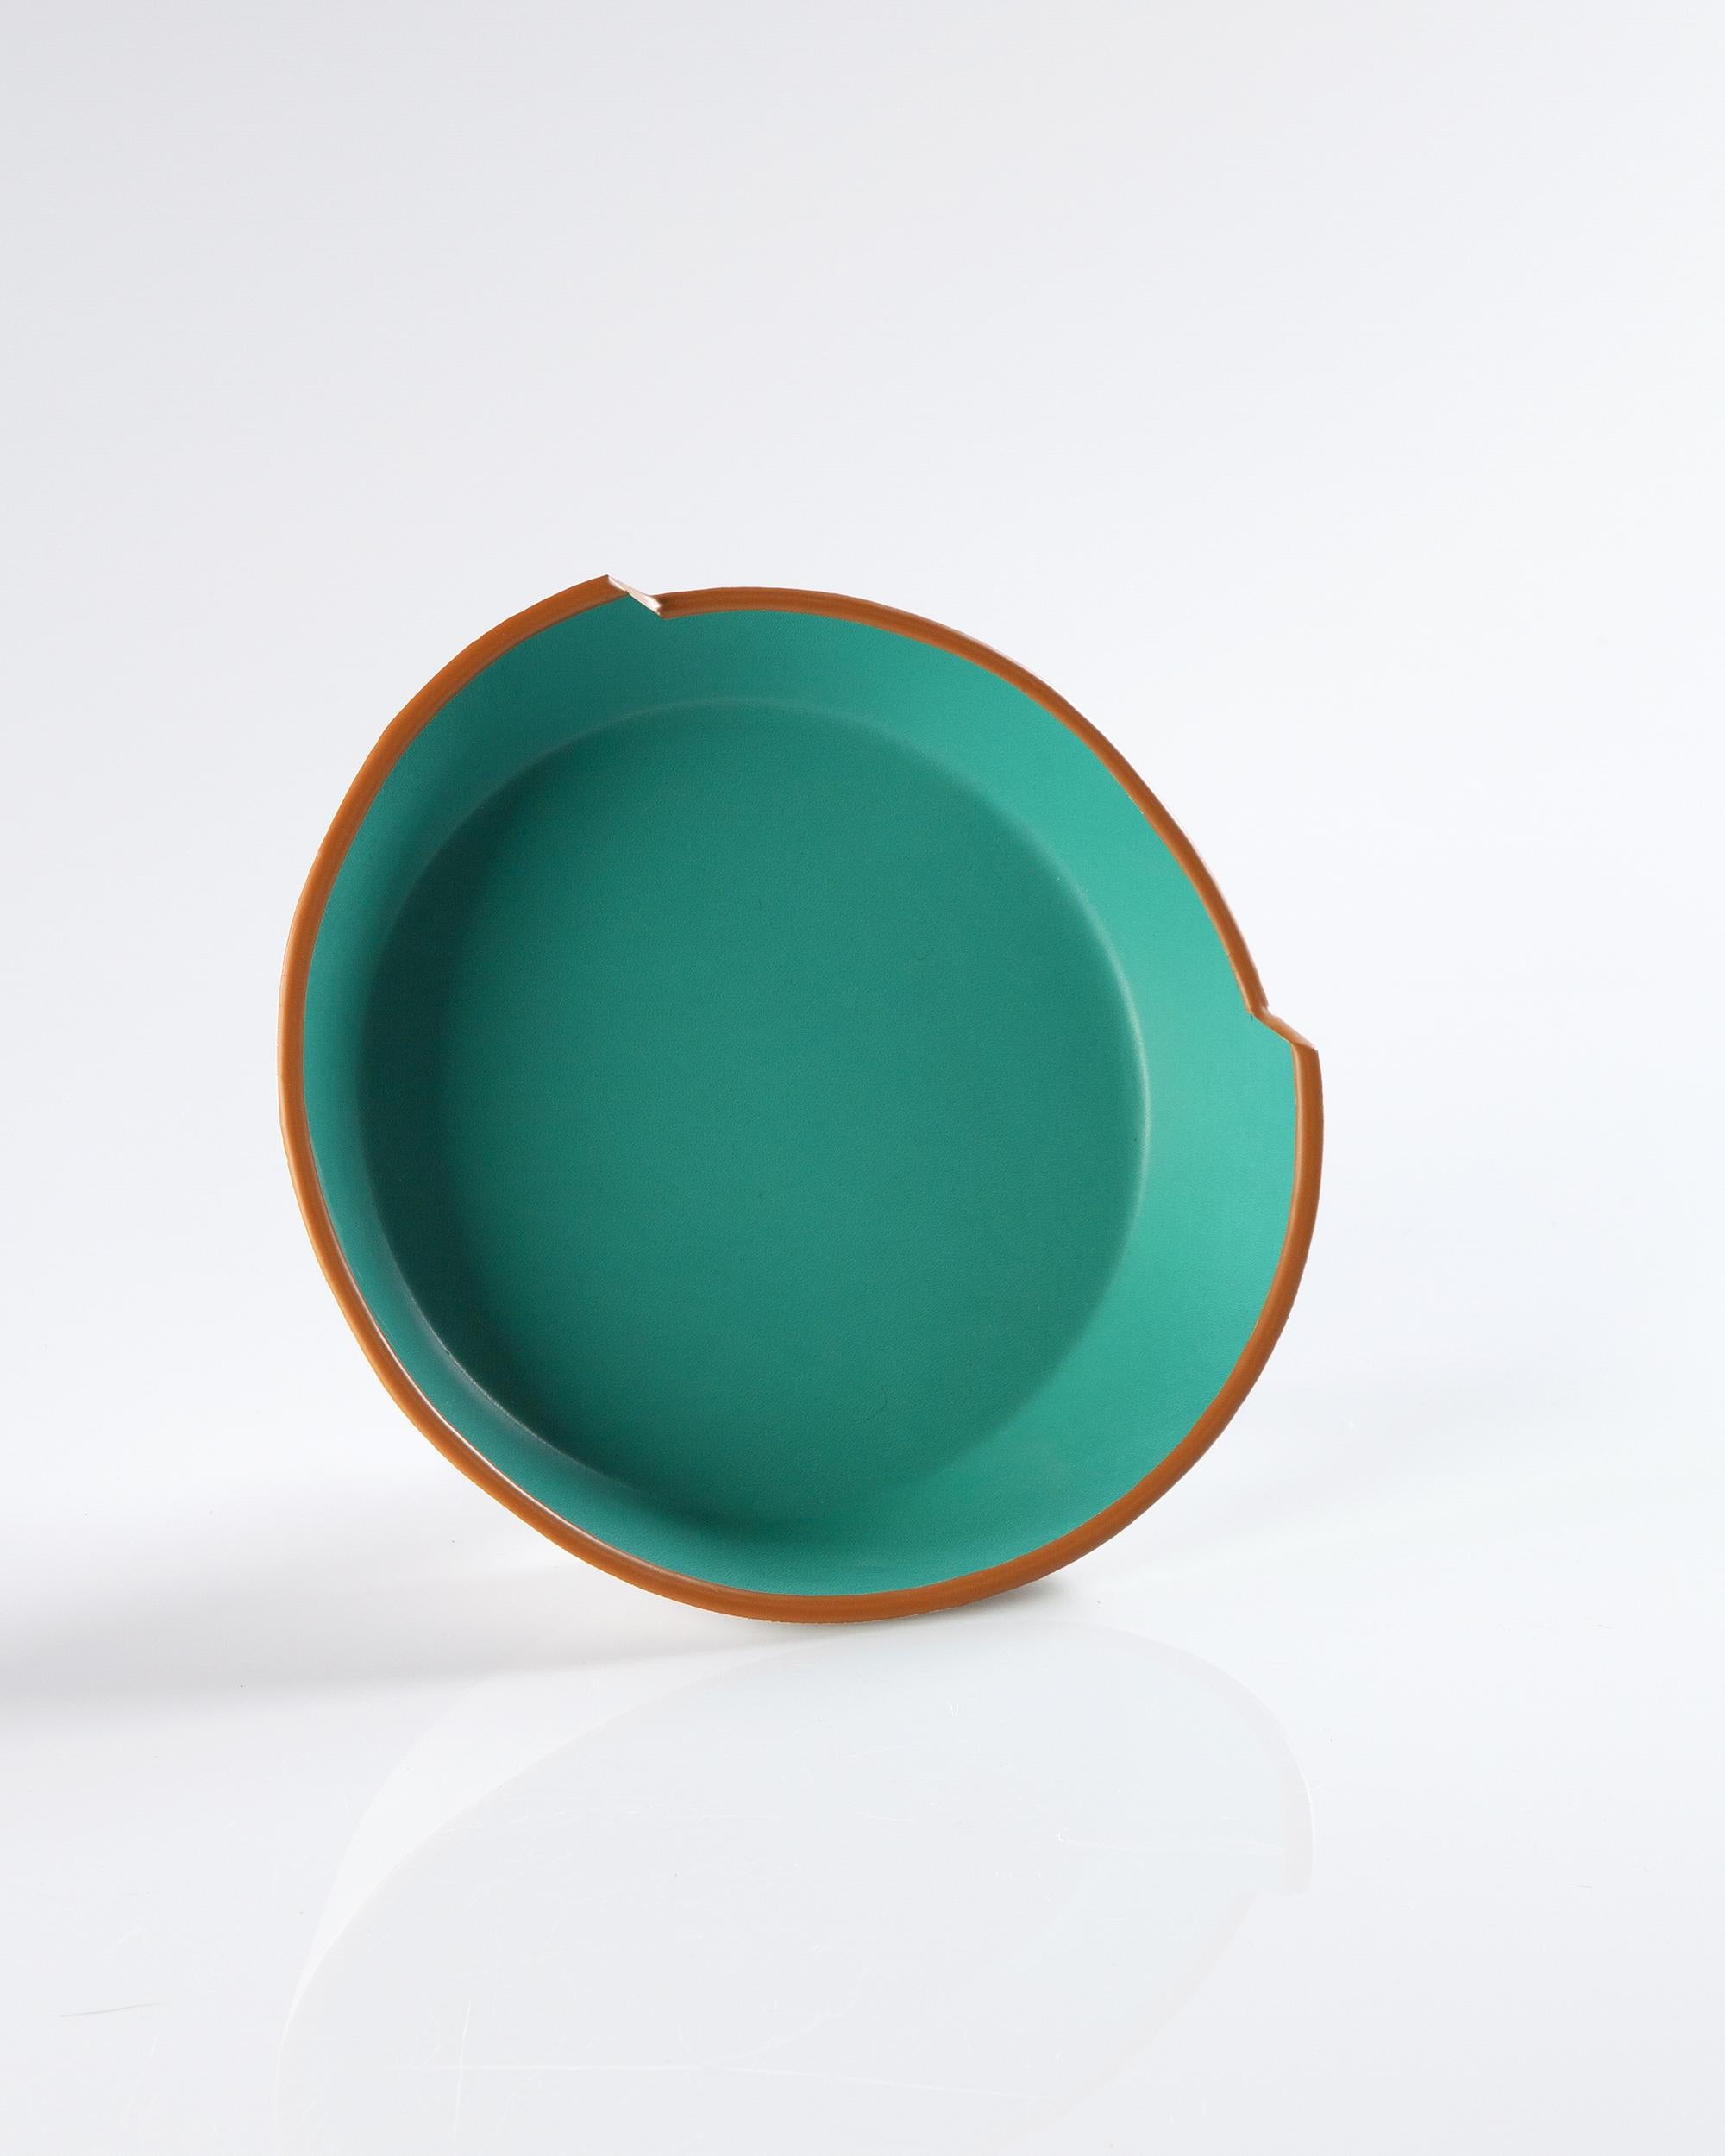 Spanish Handmade Luxury Leather Bowl in Teal and White For Sale